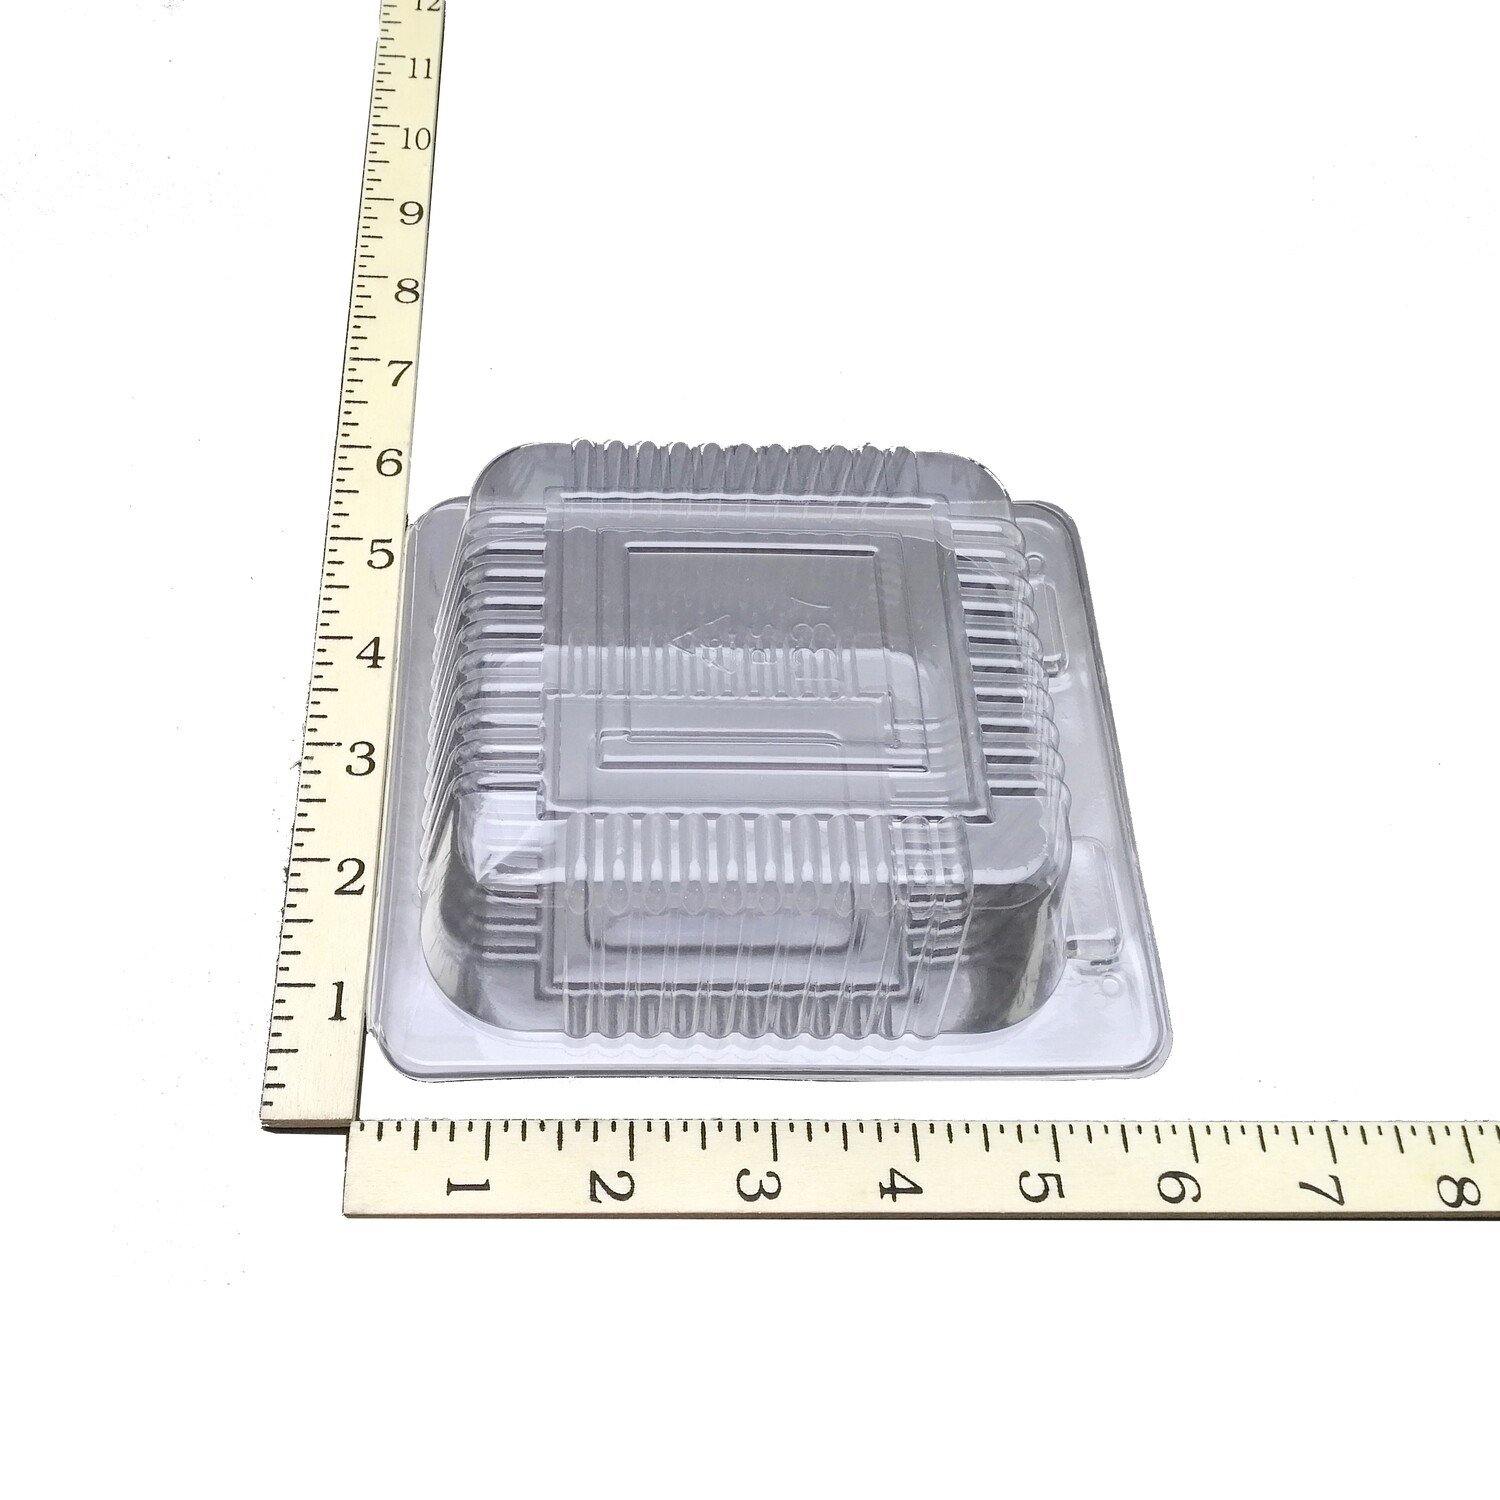 J-337 CANISTER (6 x 6) - Kitchen Convenience: Ingredients & Supplies Delivery